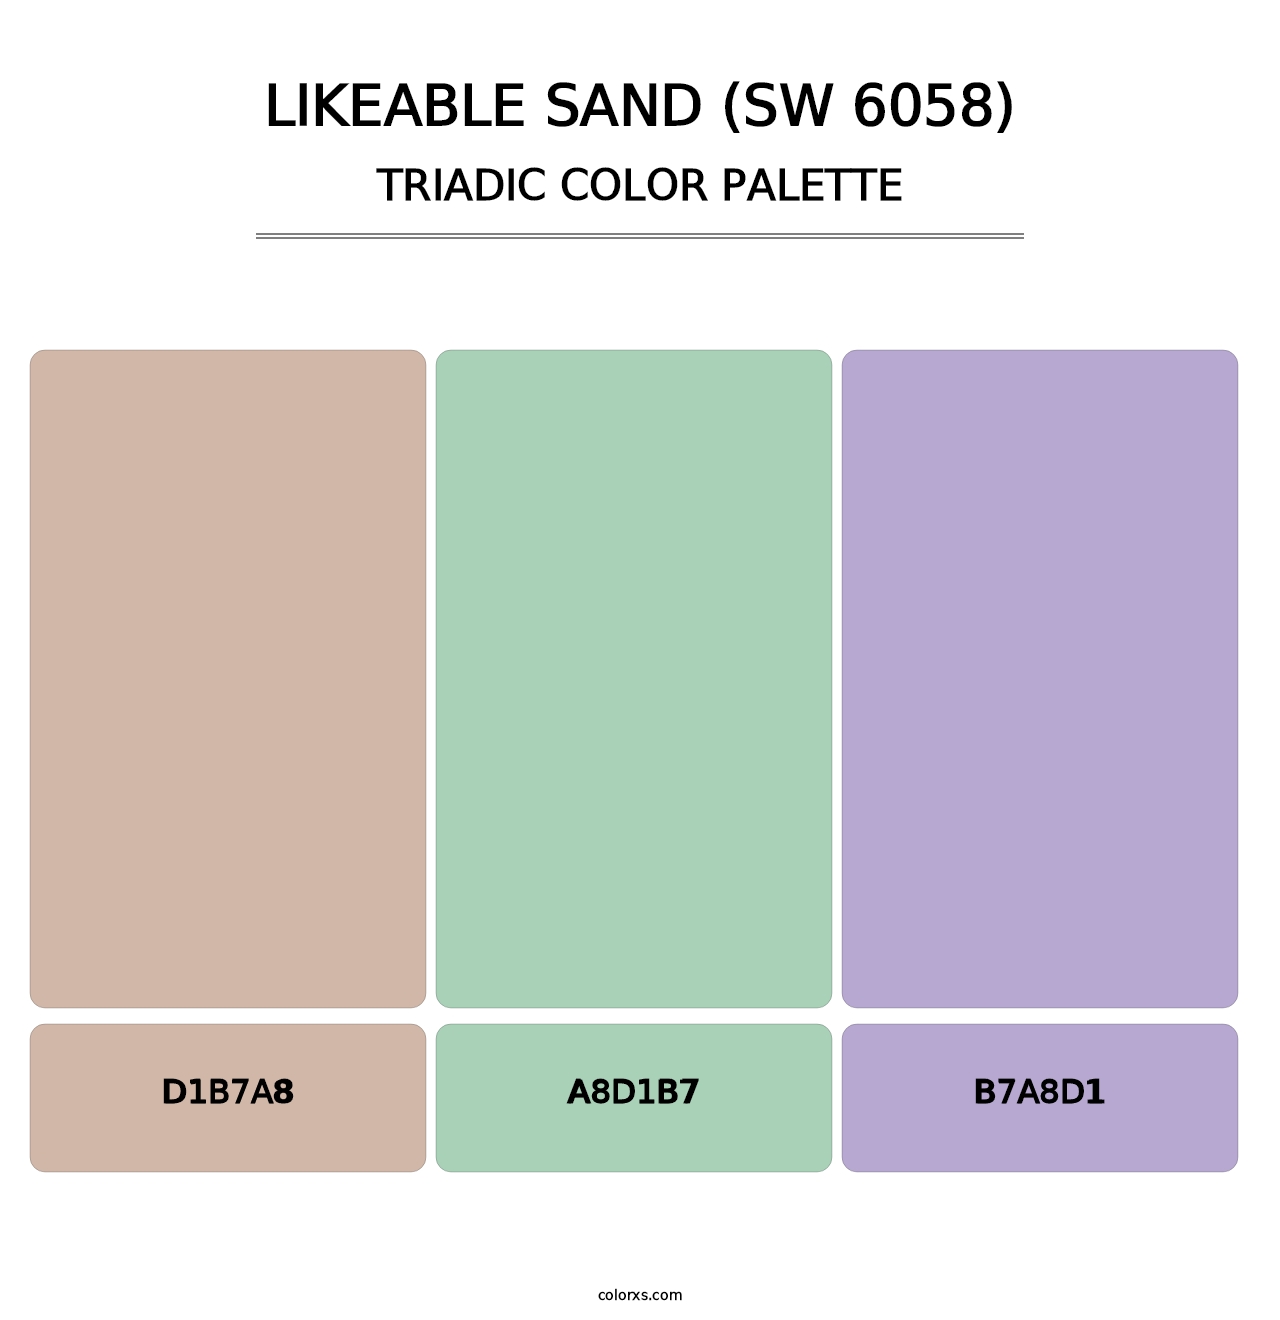 Likeable Sand (SW 6058) - Triadic Color Palette